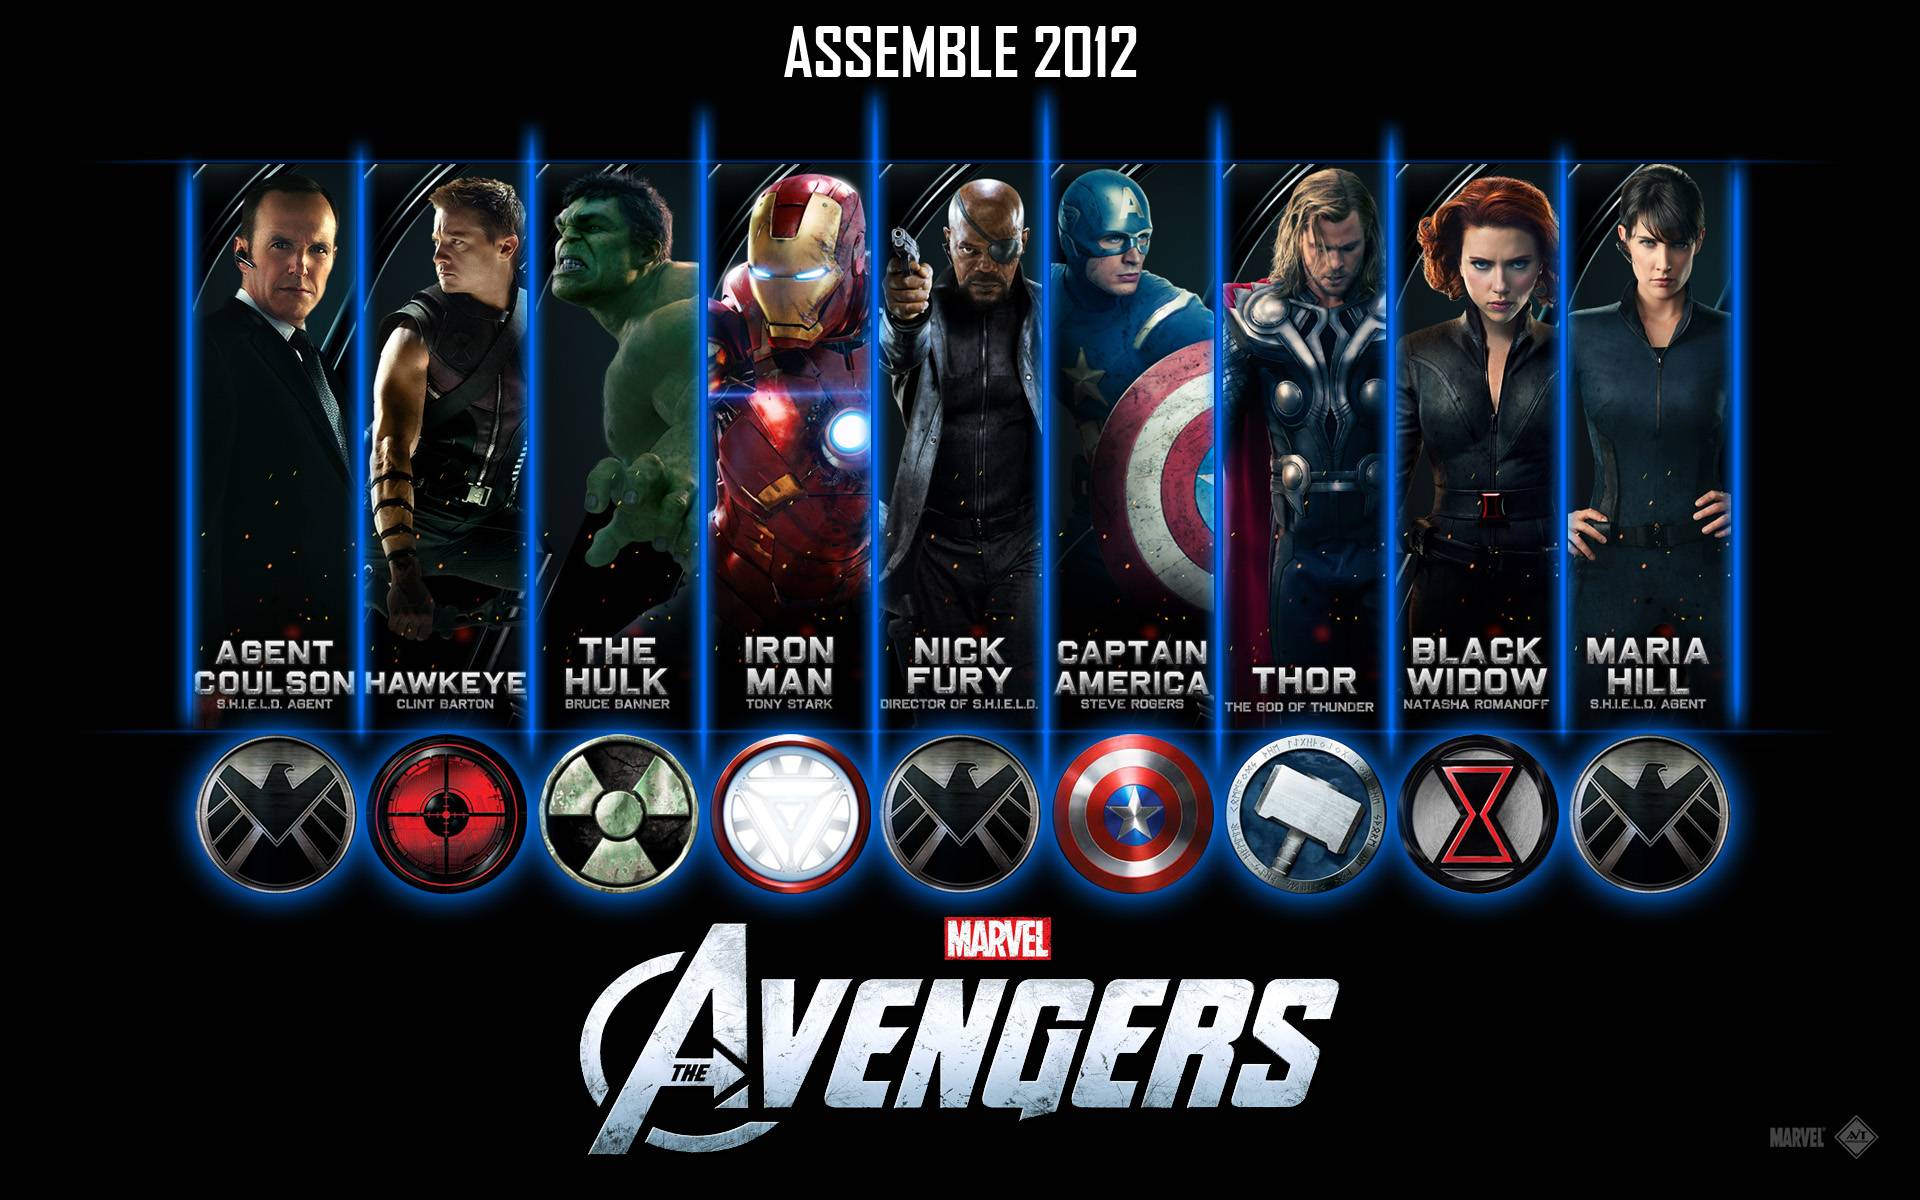 The Avengers Movie Wallpaper Your Geeky Wallpapers